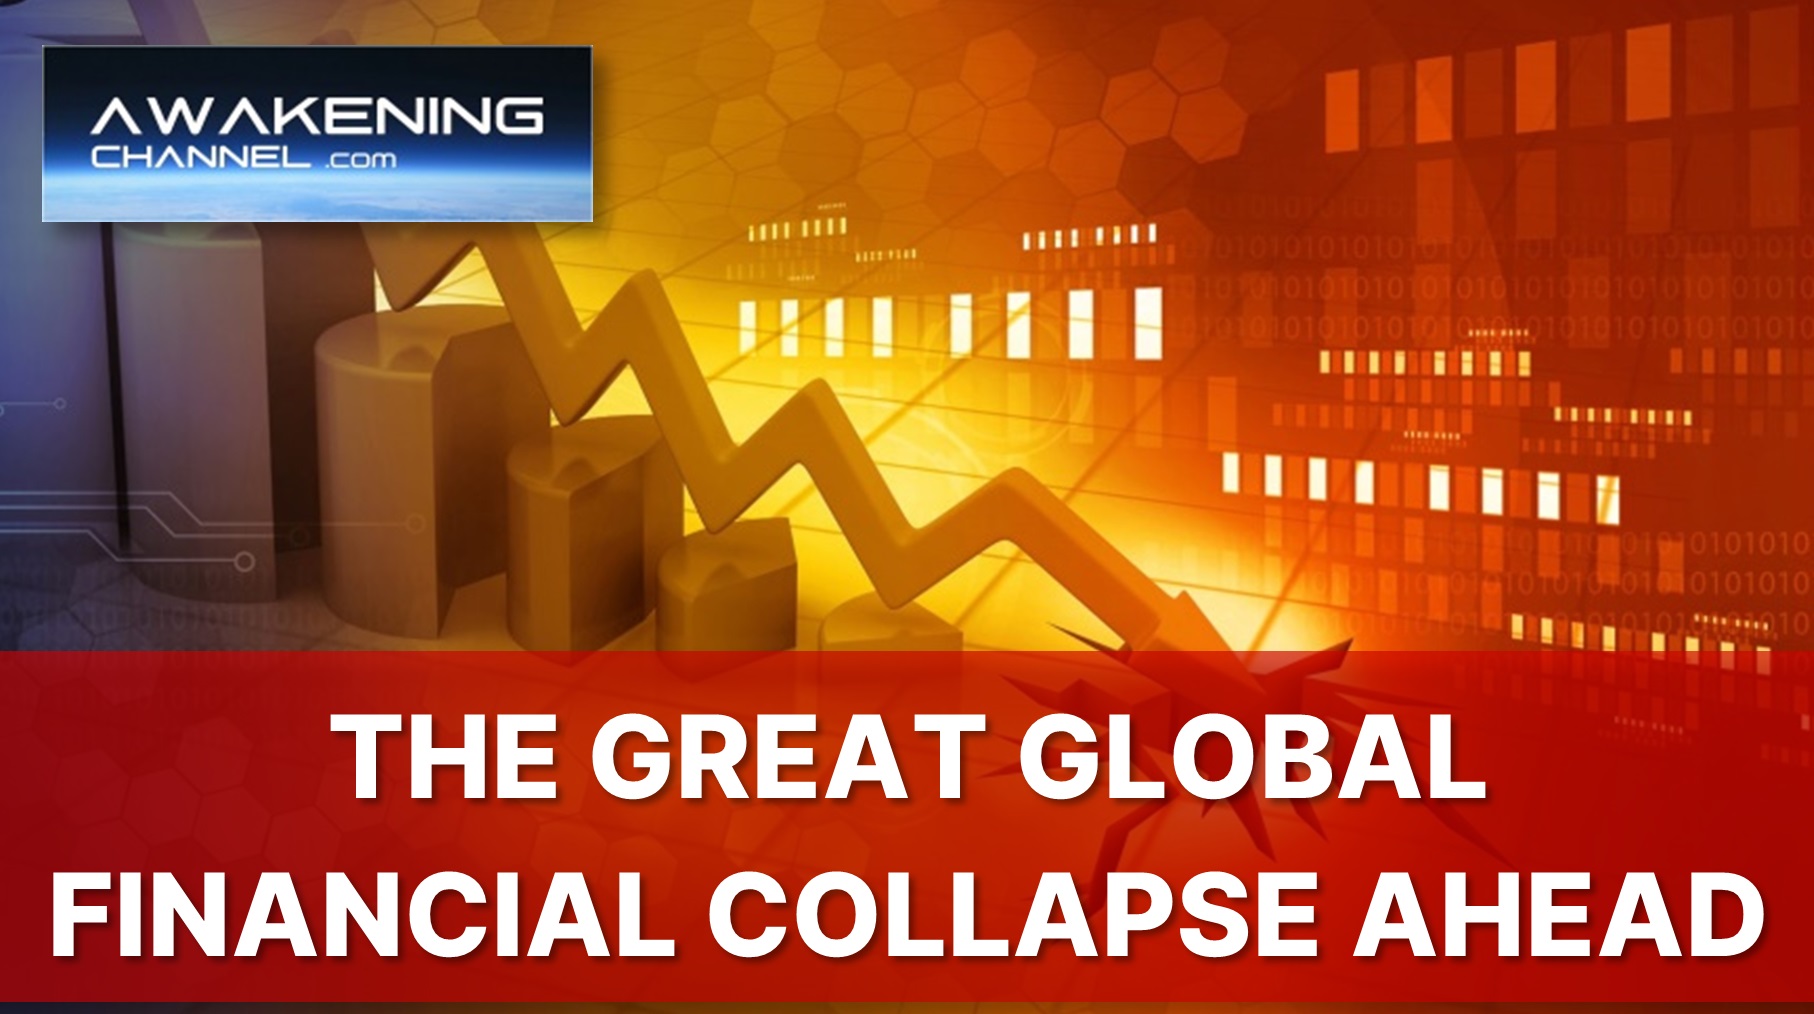 THE GREAT GLOBAL FINANCIAL COLLAPSE AHEAD